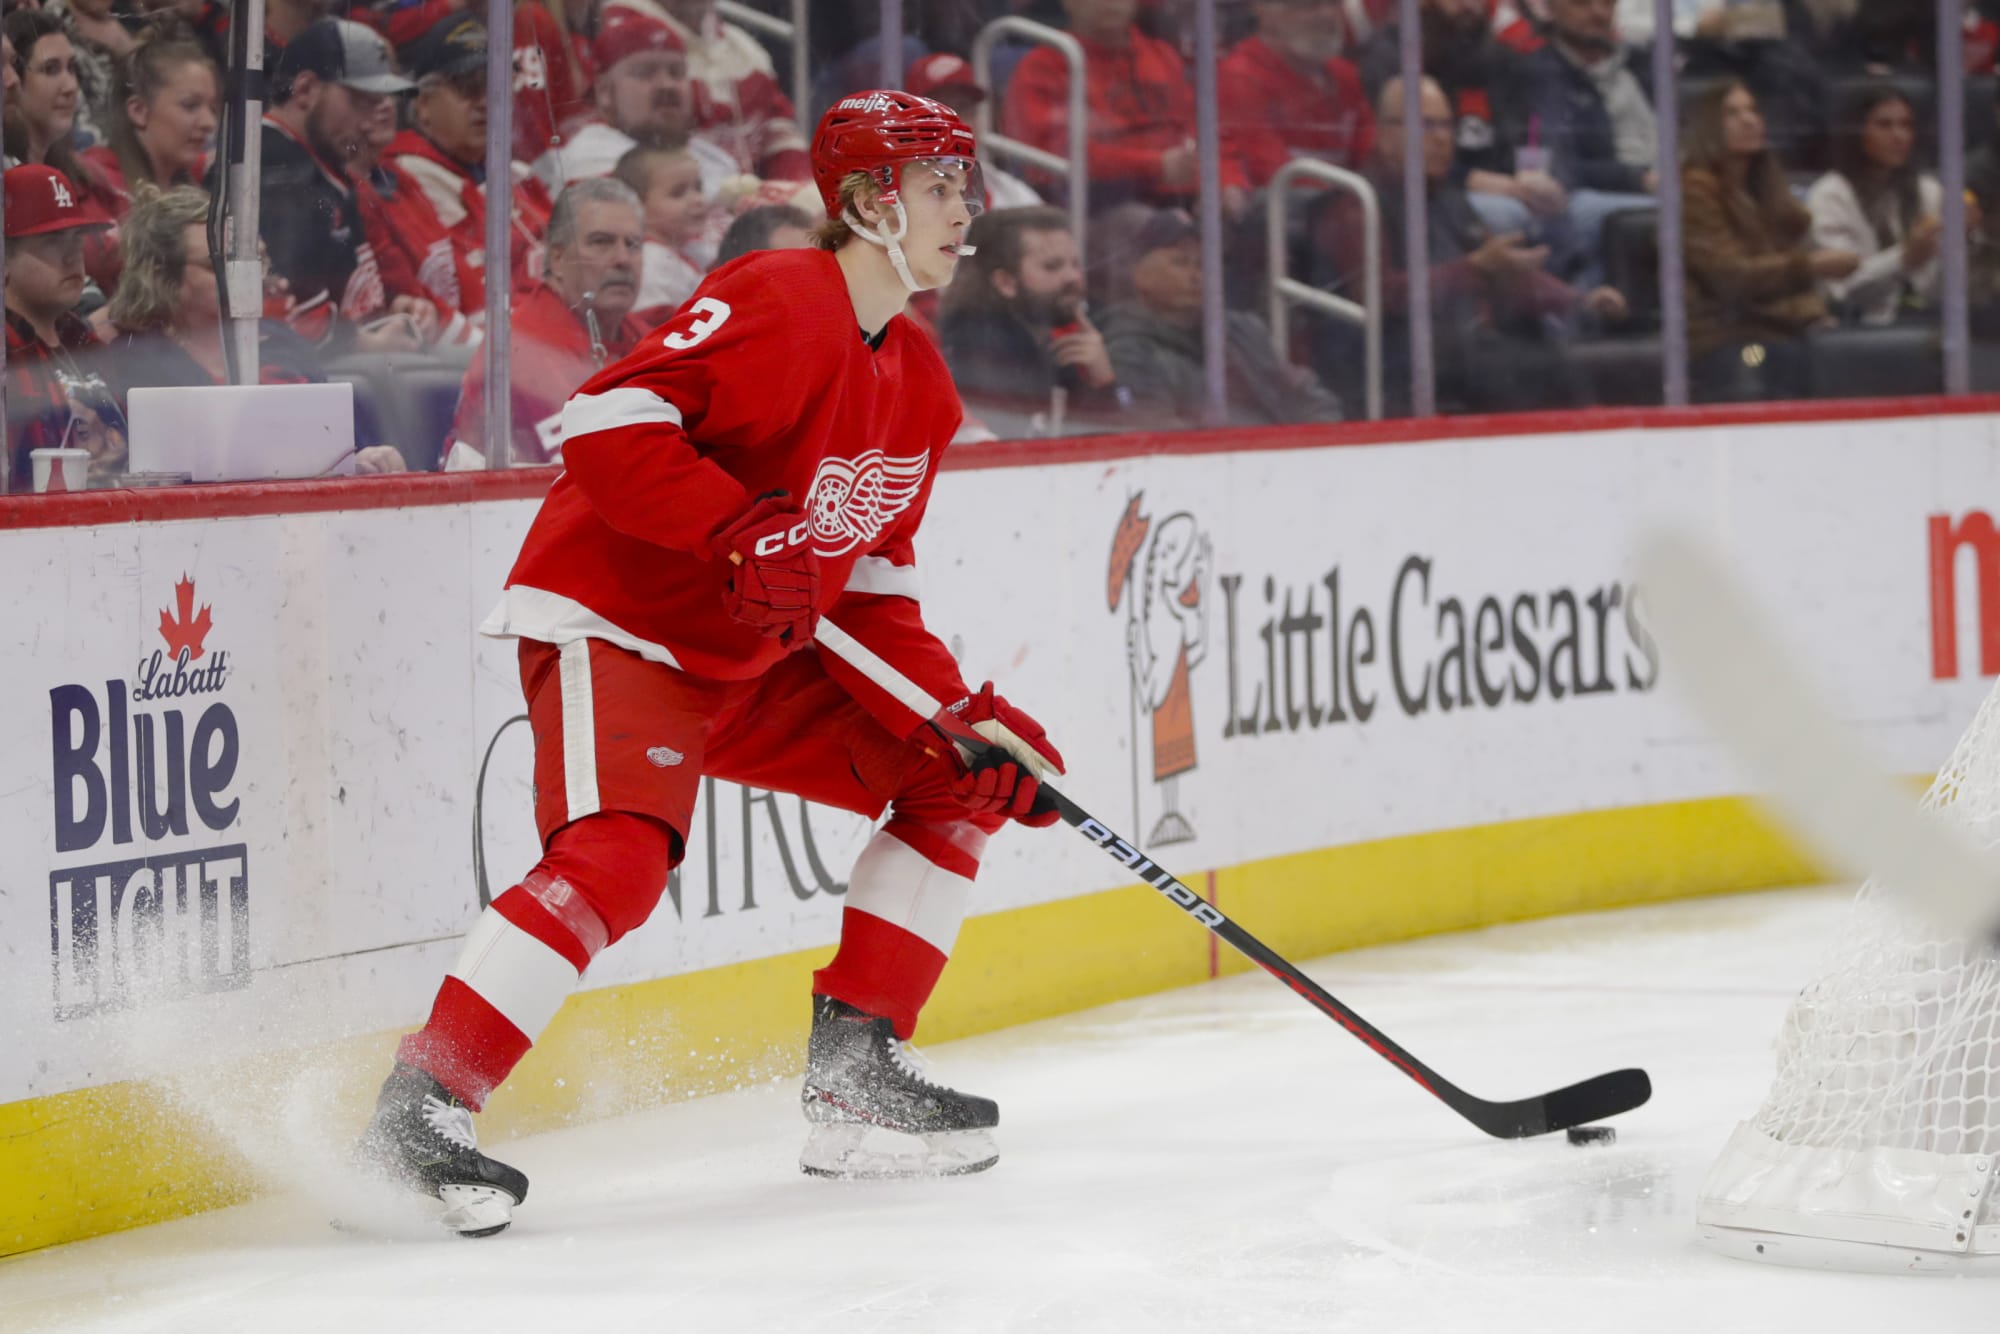 Simon Edvinsson on what being called up by Detroit Red Wings